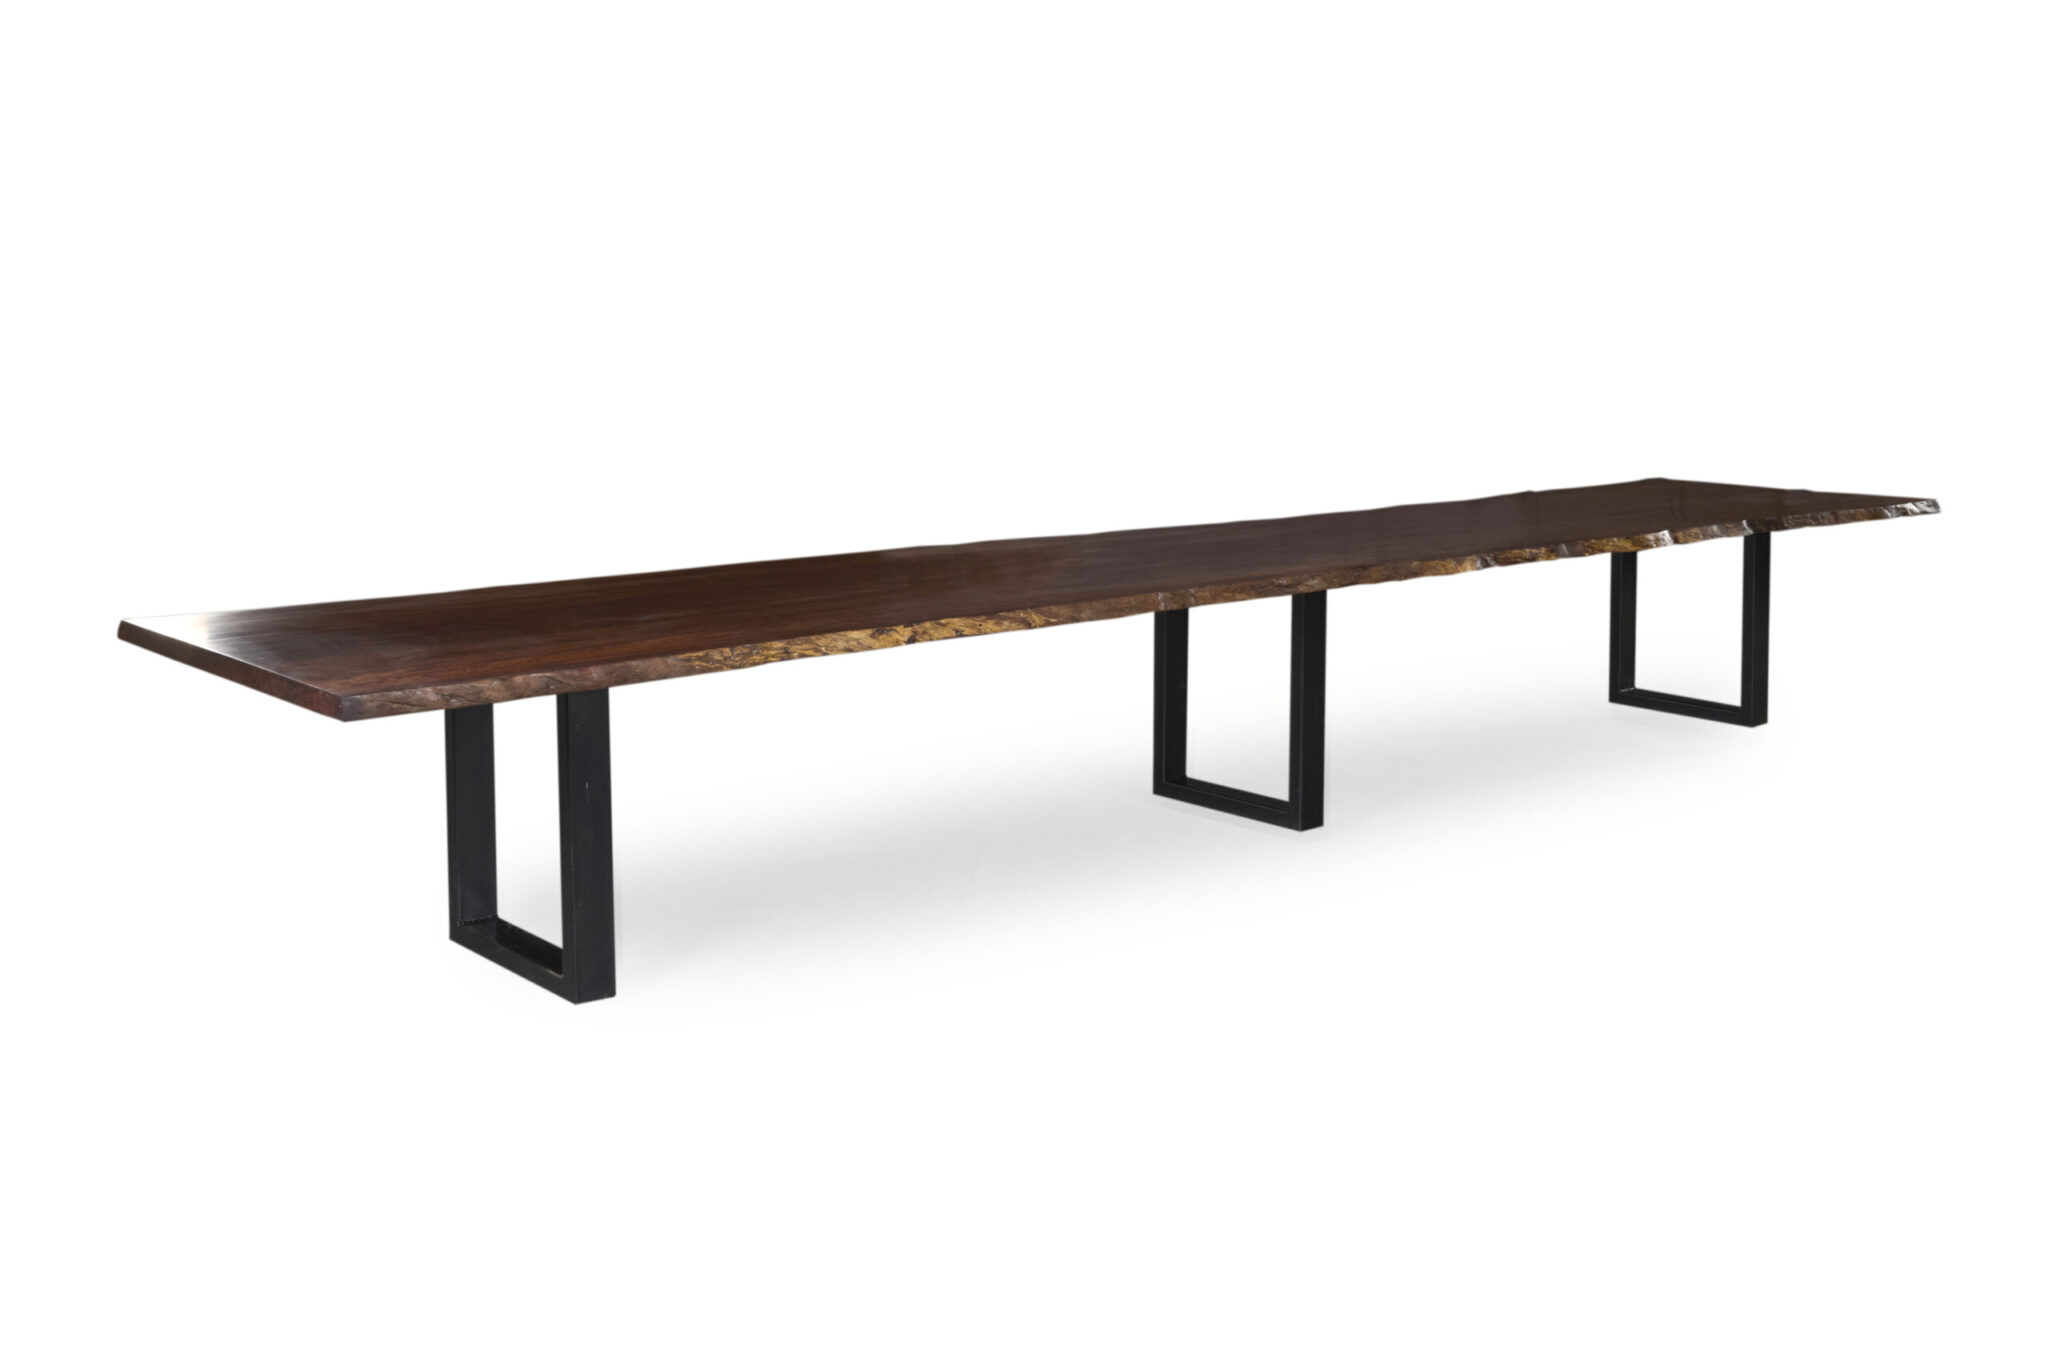 Versatile Brighton Table Perfect for Dining or Boardroom Meetings